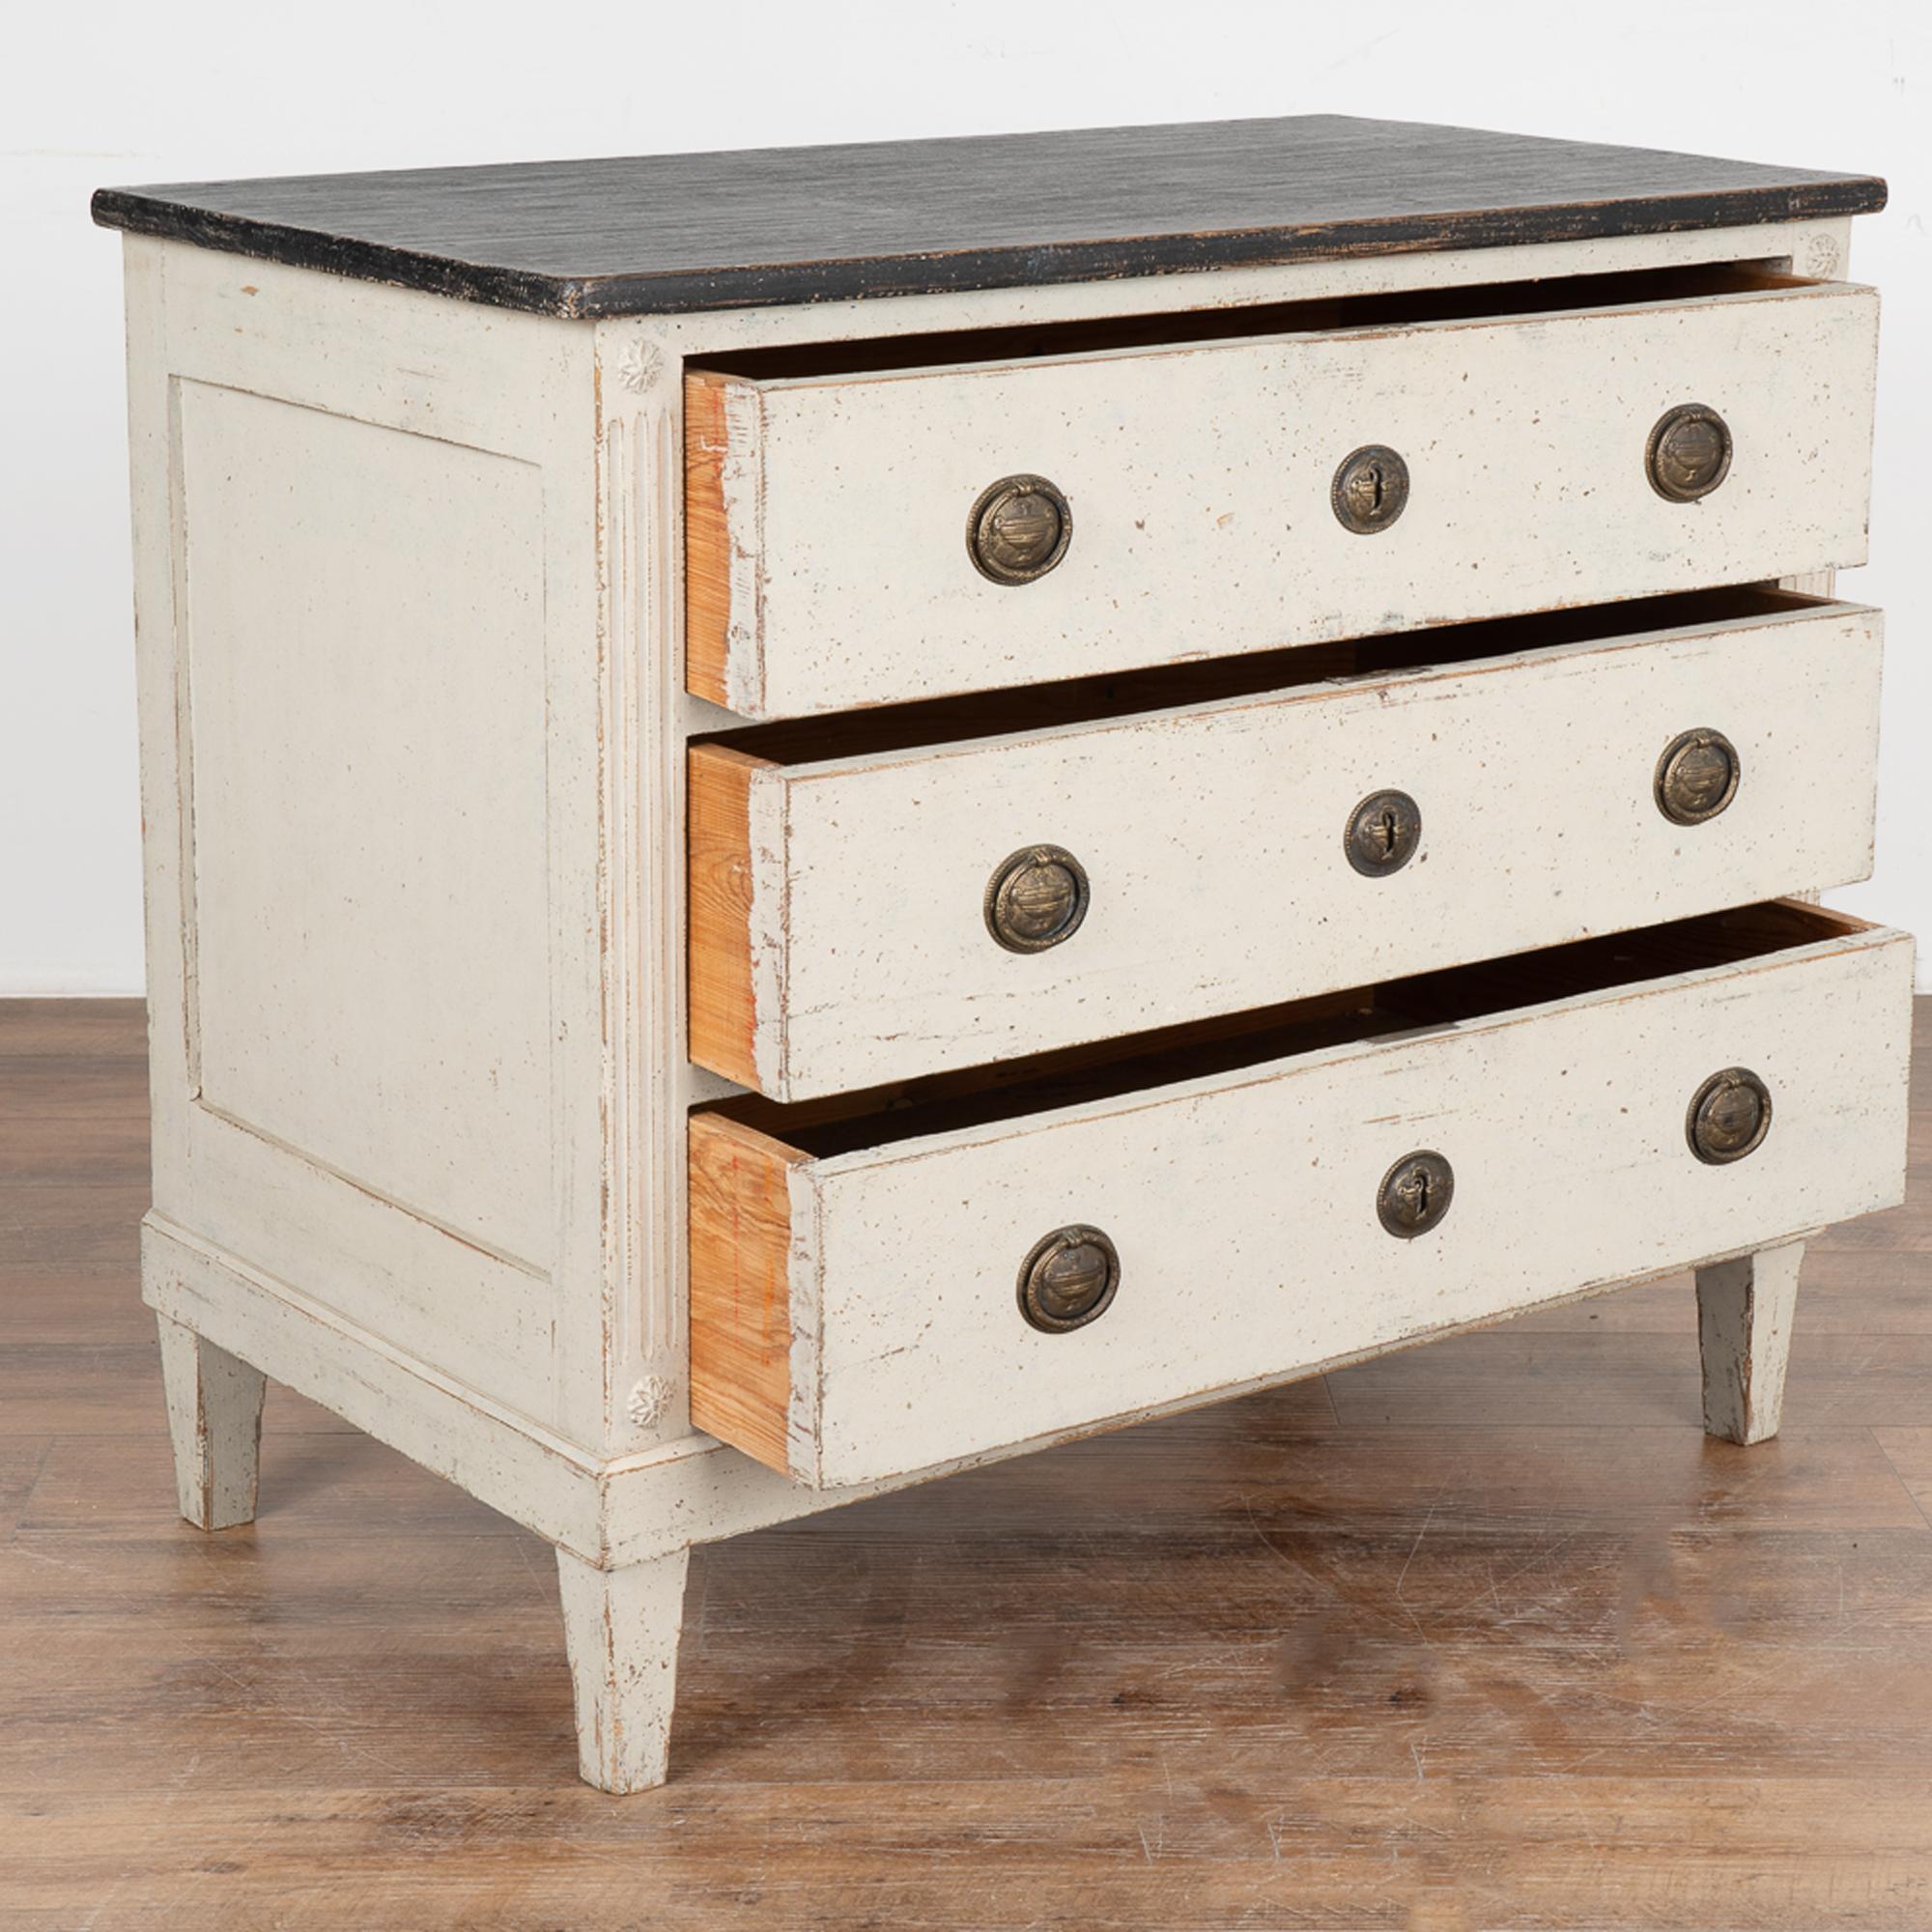 Swedish Gray and Black Painted Gustavian Chest of Drawers, Sweden, circa 1840-1860